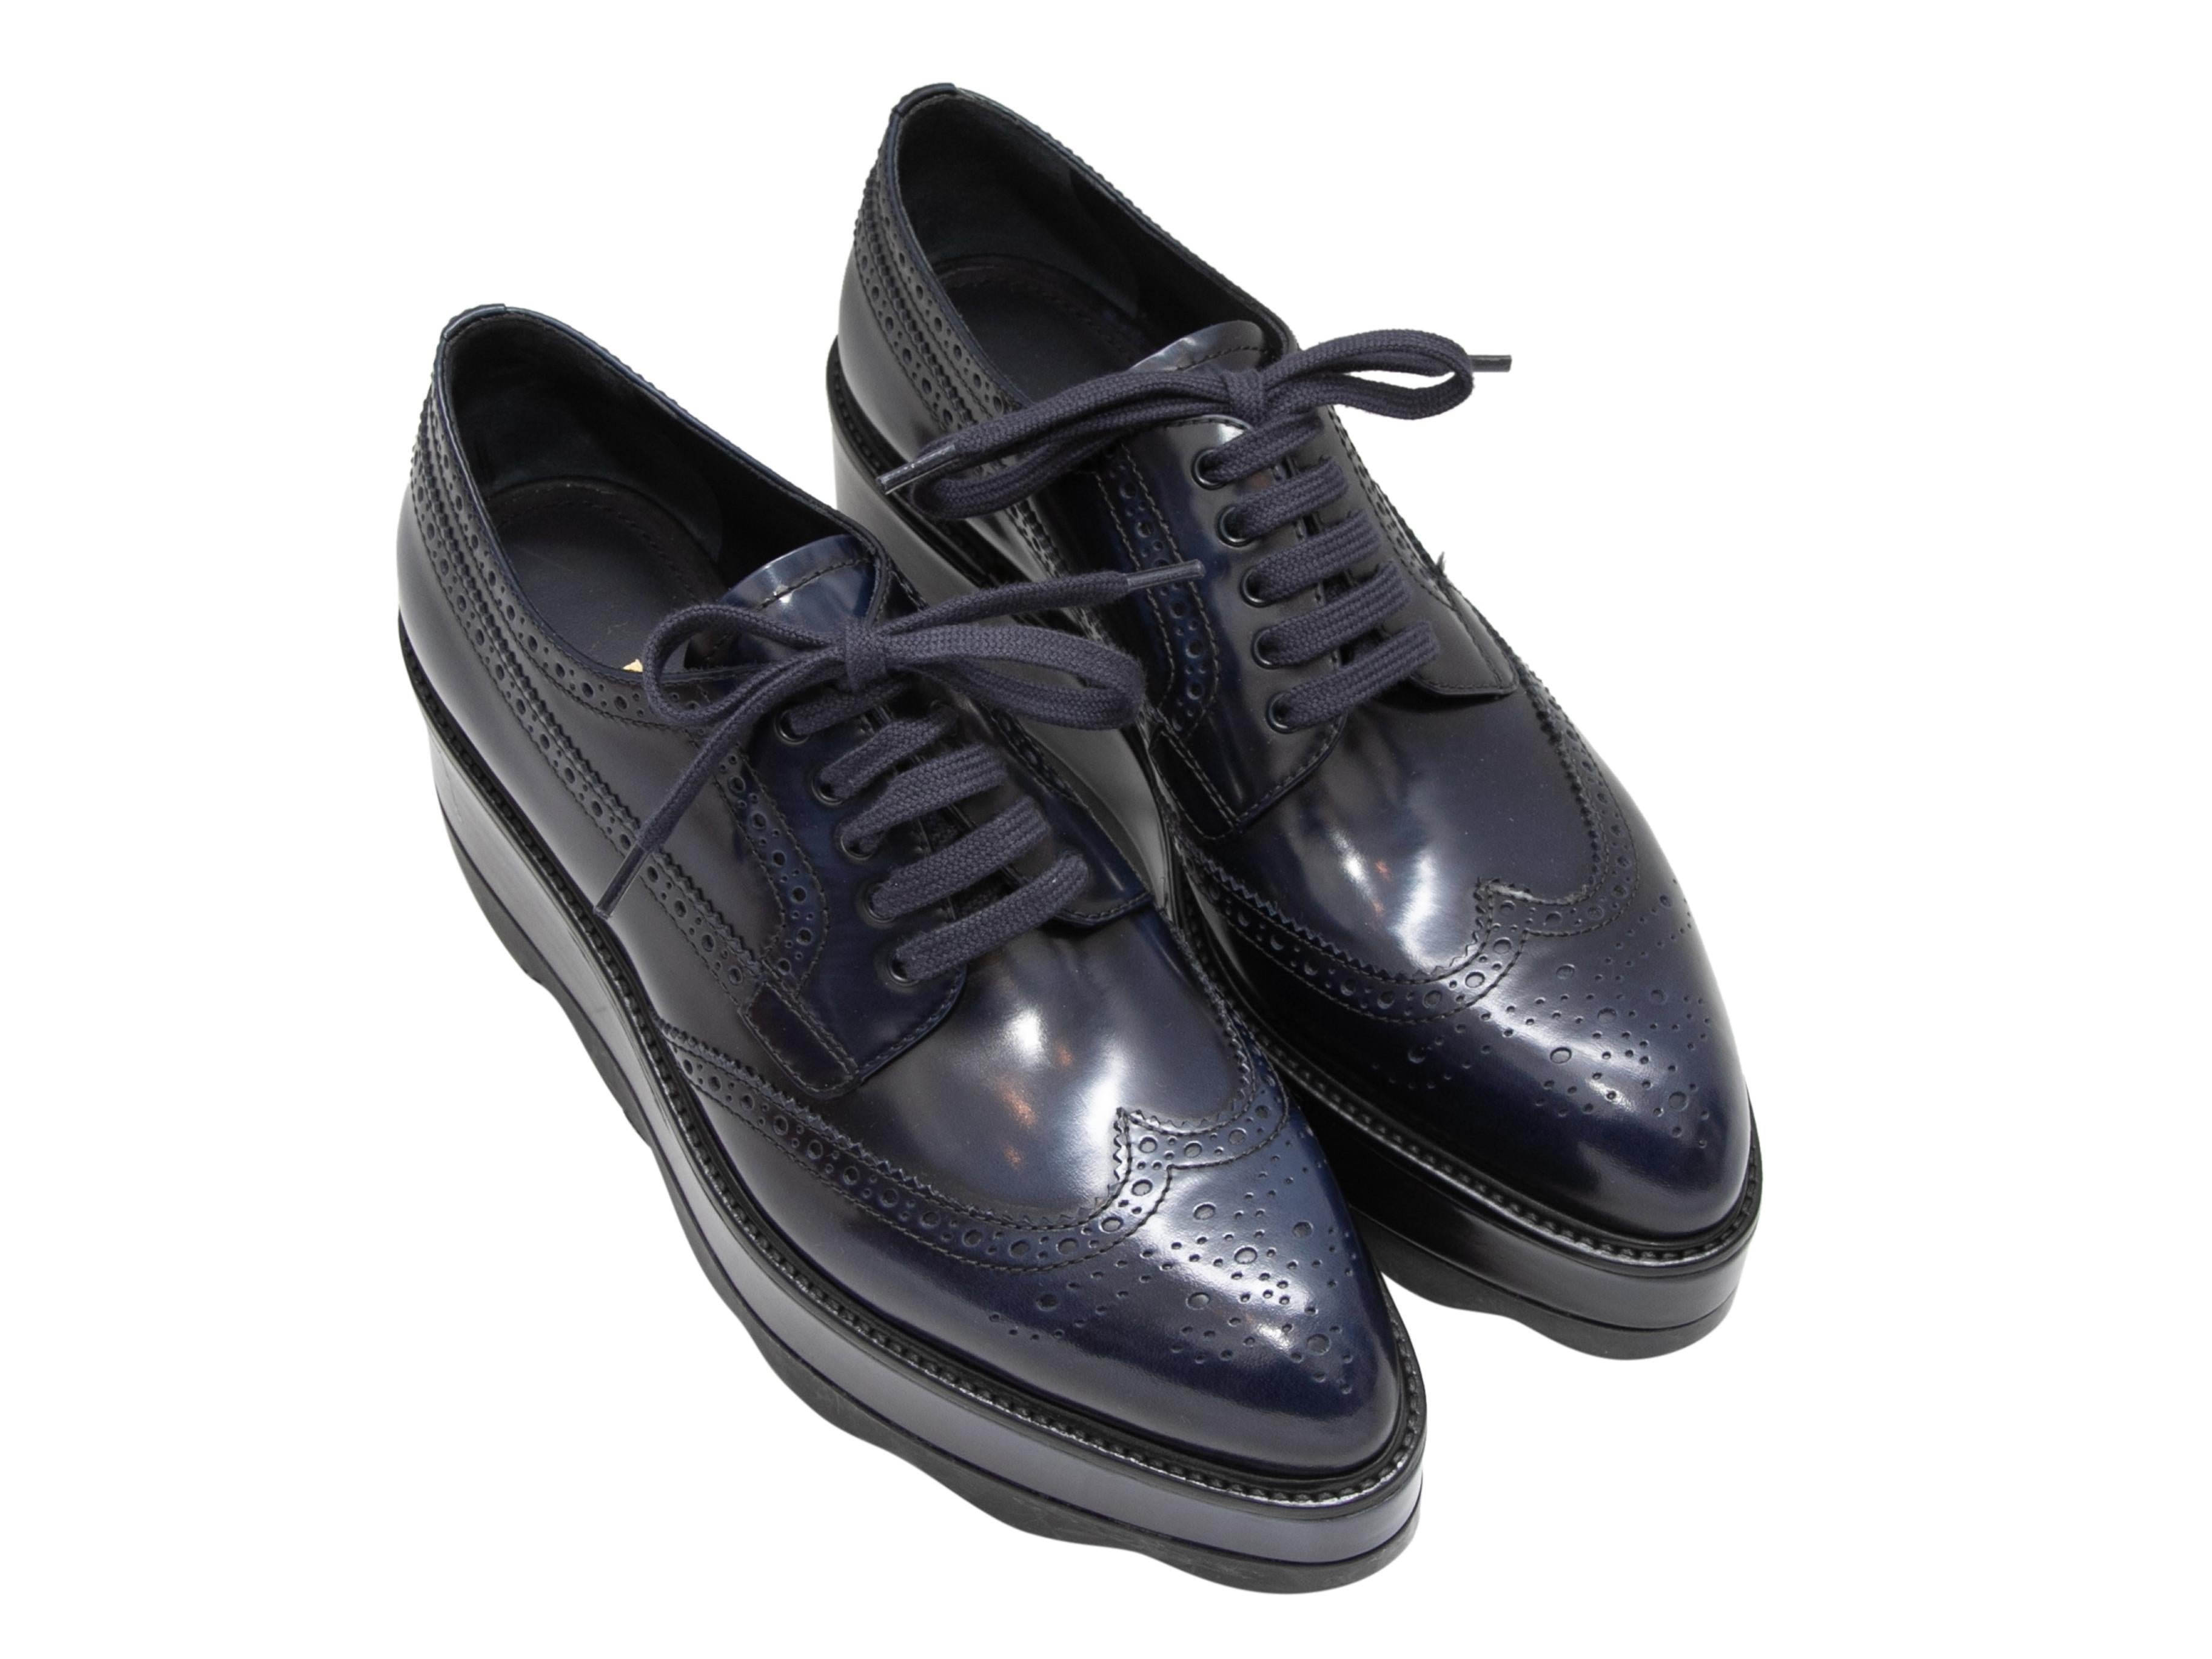 Navy Prada Platform Oxfords Size 39 In Good Condition For Sale In New York, NY